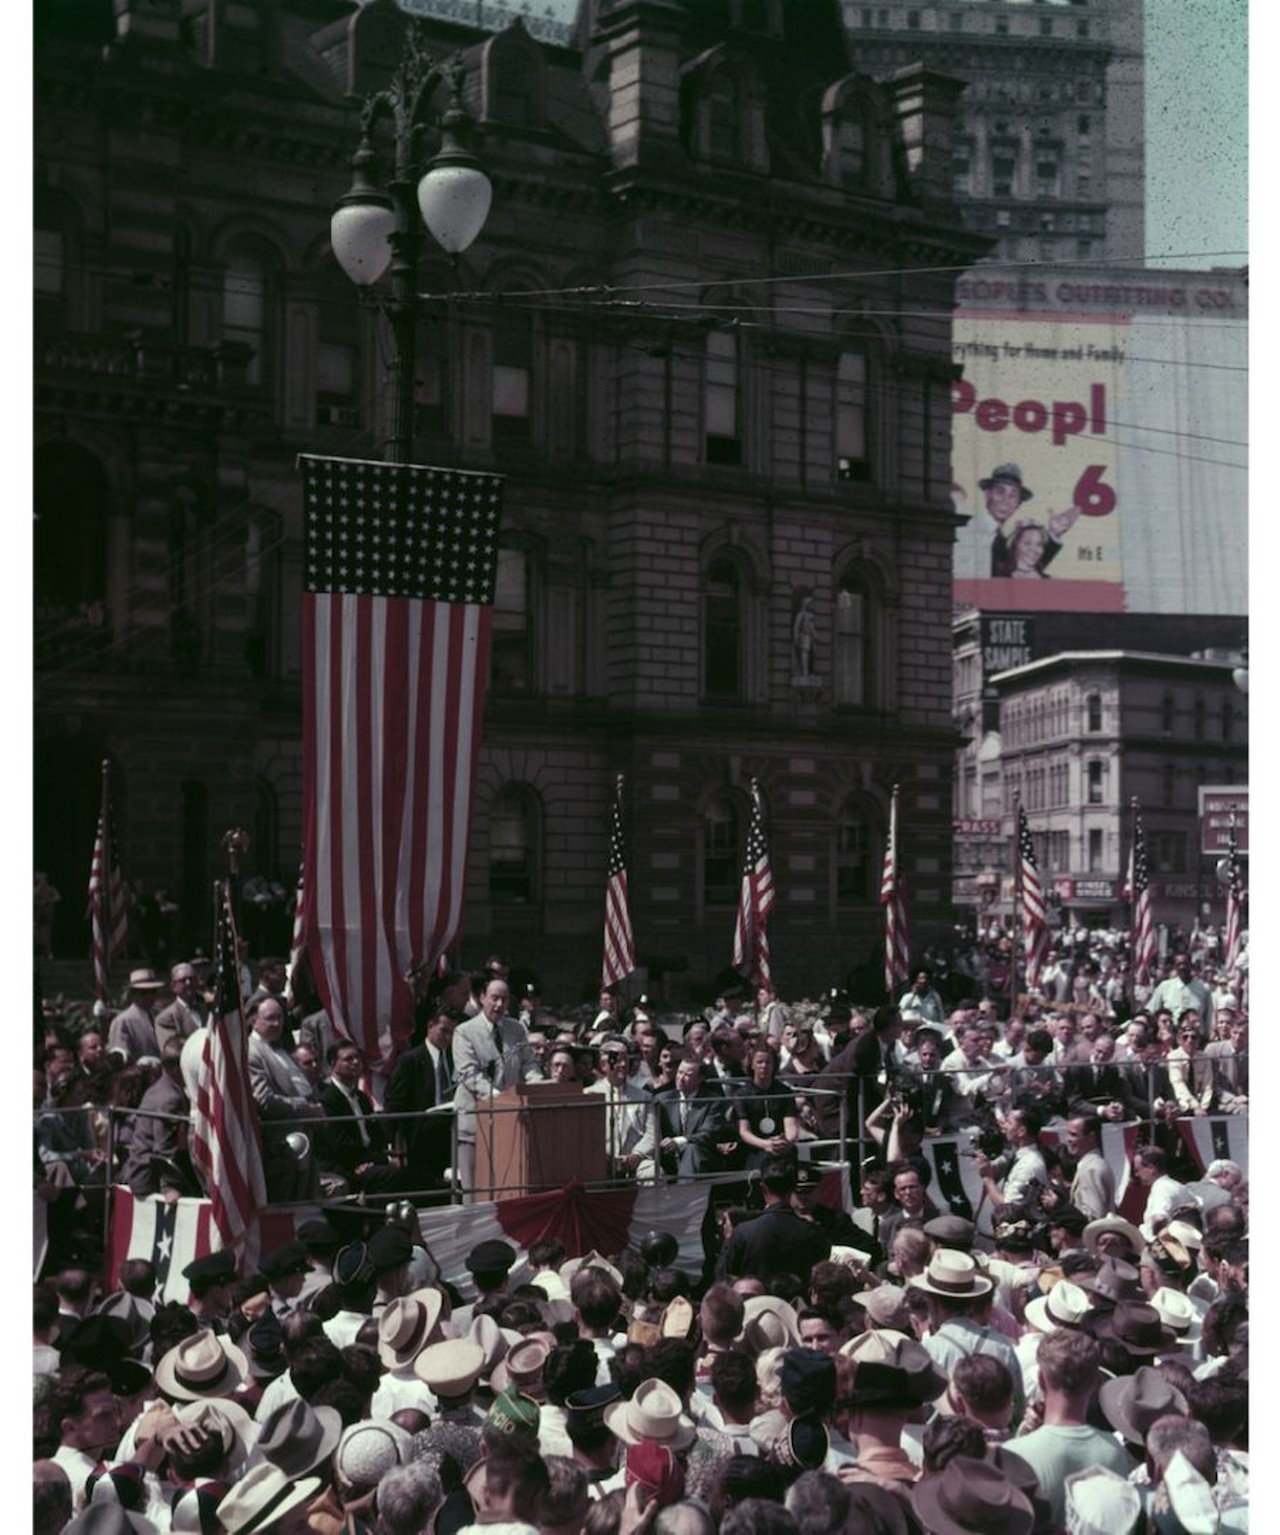 Presidential candidate Adlai Stevenson speaking in front of City Hall to labor crowd, Governor Williams, Blair Moody, Frank X Martell, Walter Reuther, and Mrs. Williams.(1952) 
All photos courtesy of Walter P. Reuther Library, Archives of Labor and Urban Affairs, Wayne State University